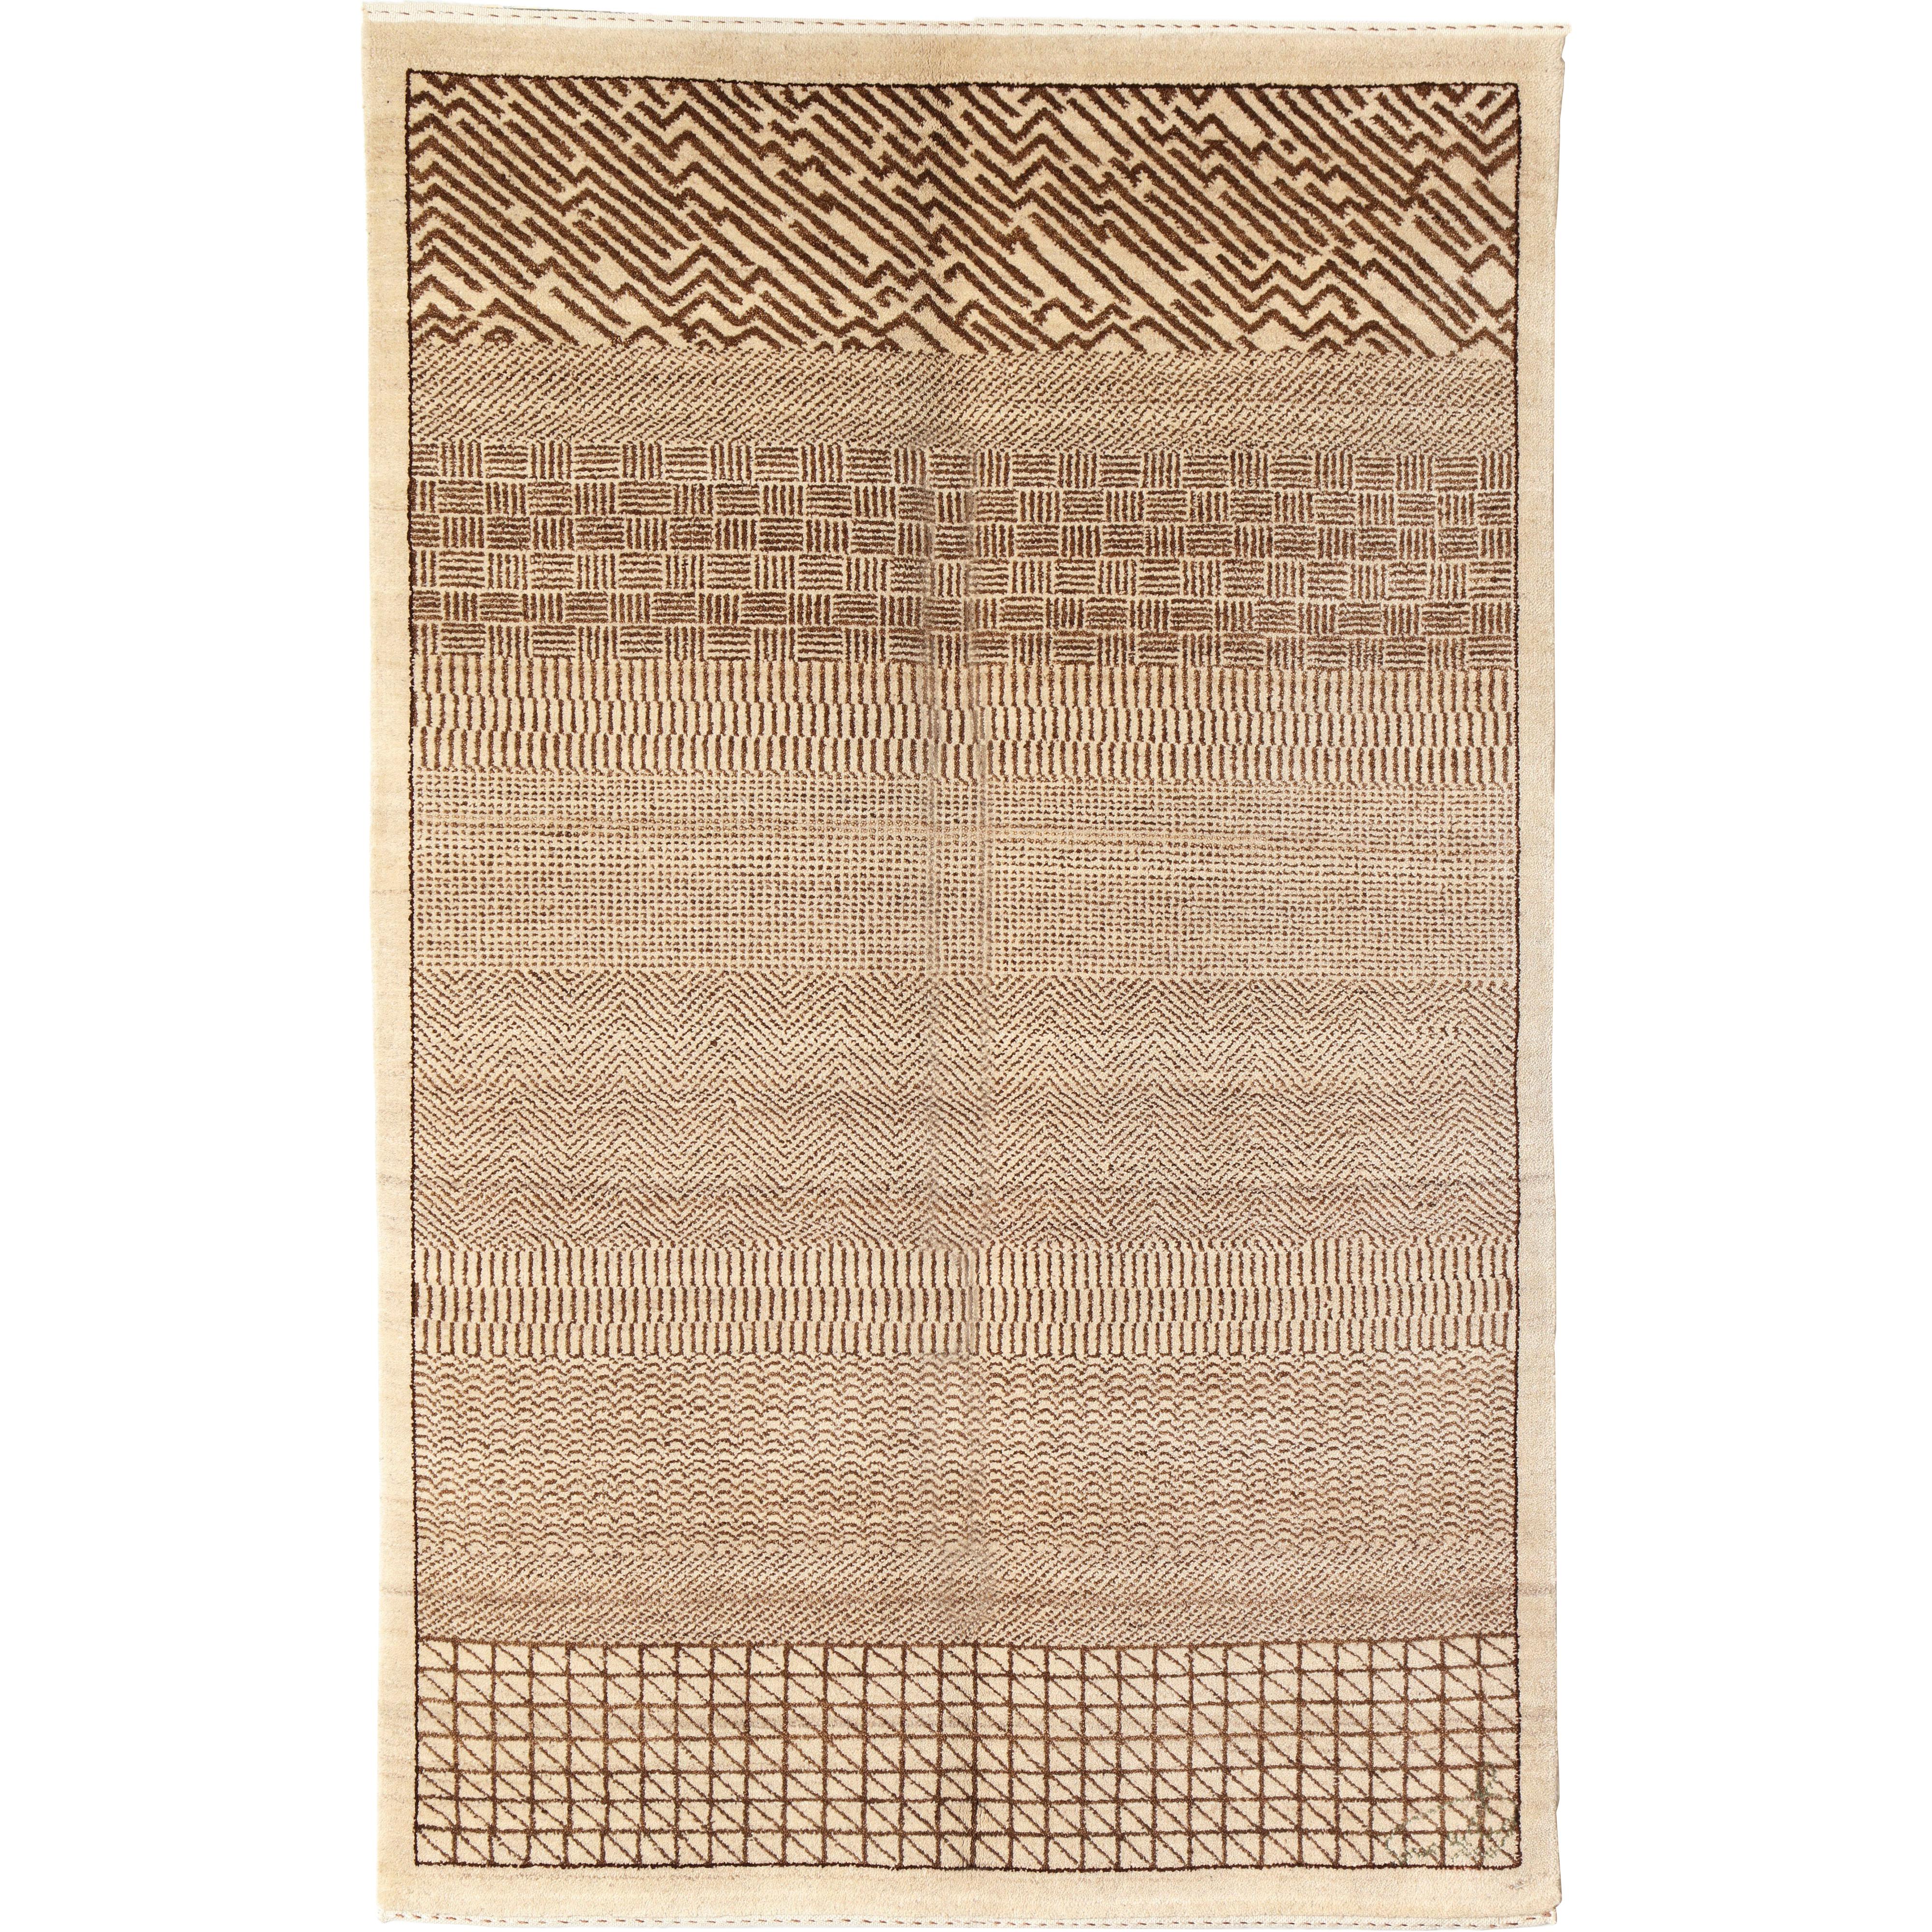 Brown and Cream "Rain" Orley Shabahang Wool Contemporary Persian Carpet, 3' x 5' For Sale